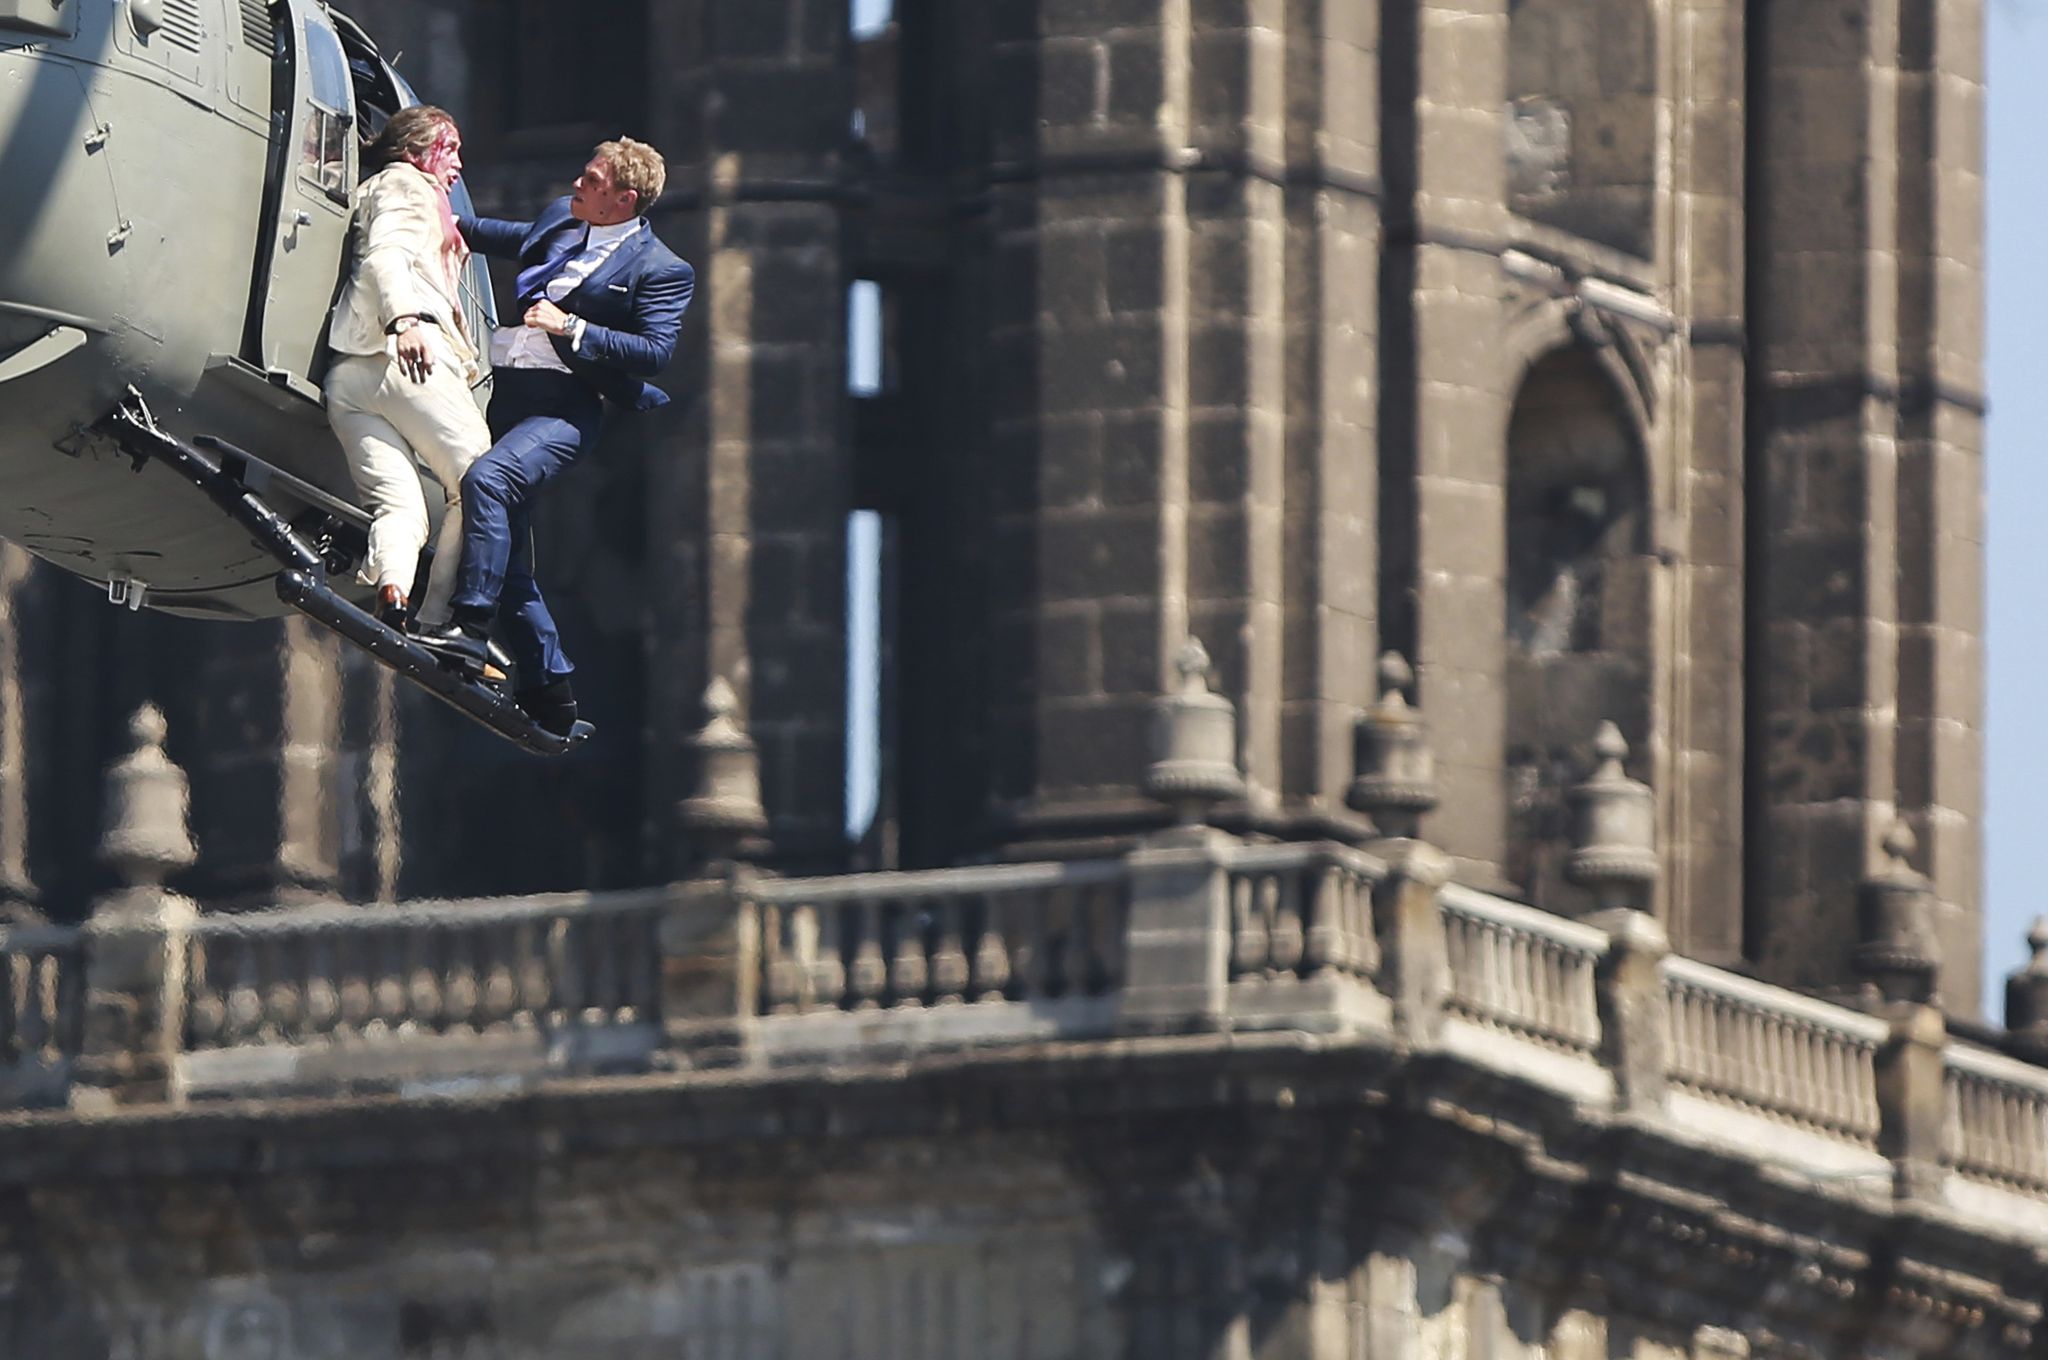 mexico city, mexico   march 31  stuntmen perform a battle hanging from a helicopter during the filming of the latest james bond movie spectre at downtown streets of mexico city on march 31, 2015 in mexico city, mexico photo by hector vivaslatincontent via getty images